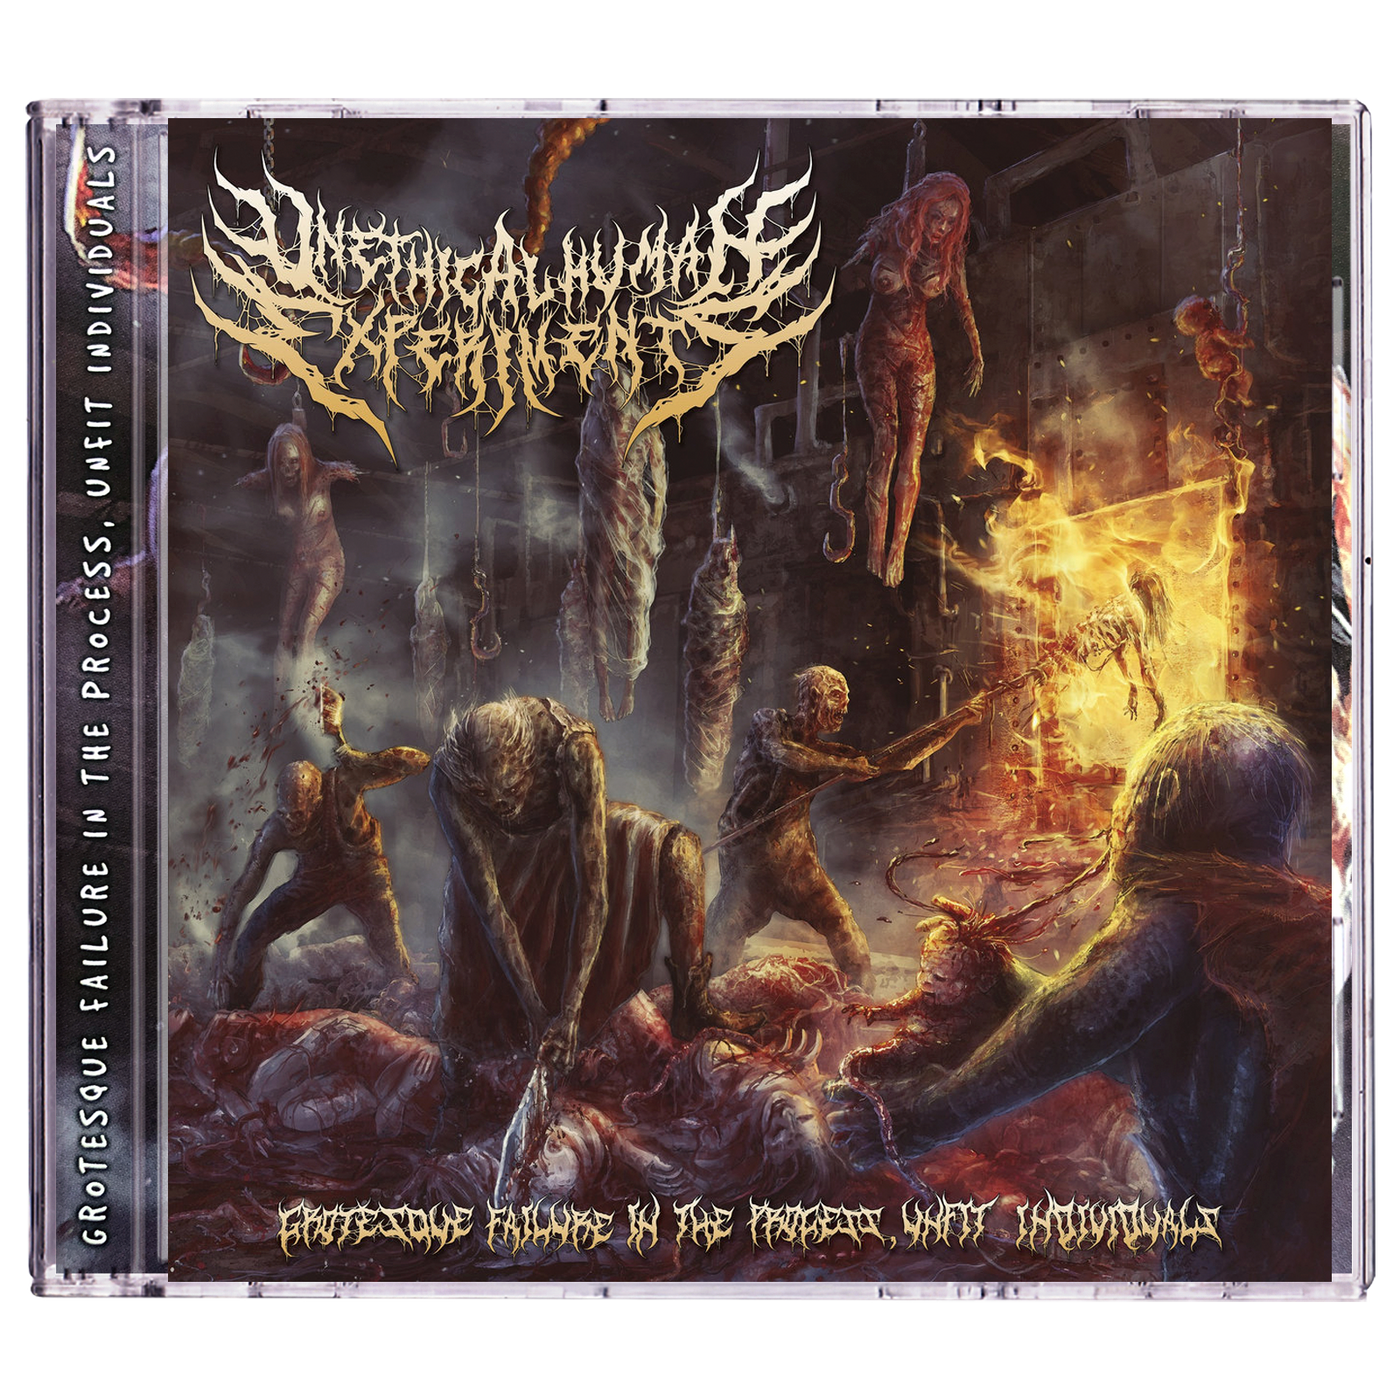 Unethical Human Experiments 'Grotesque Failure In The Process, Unfit Individuals' CD